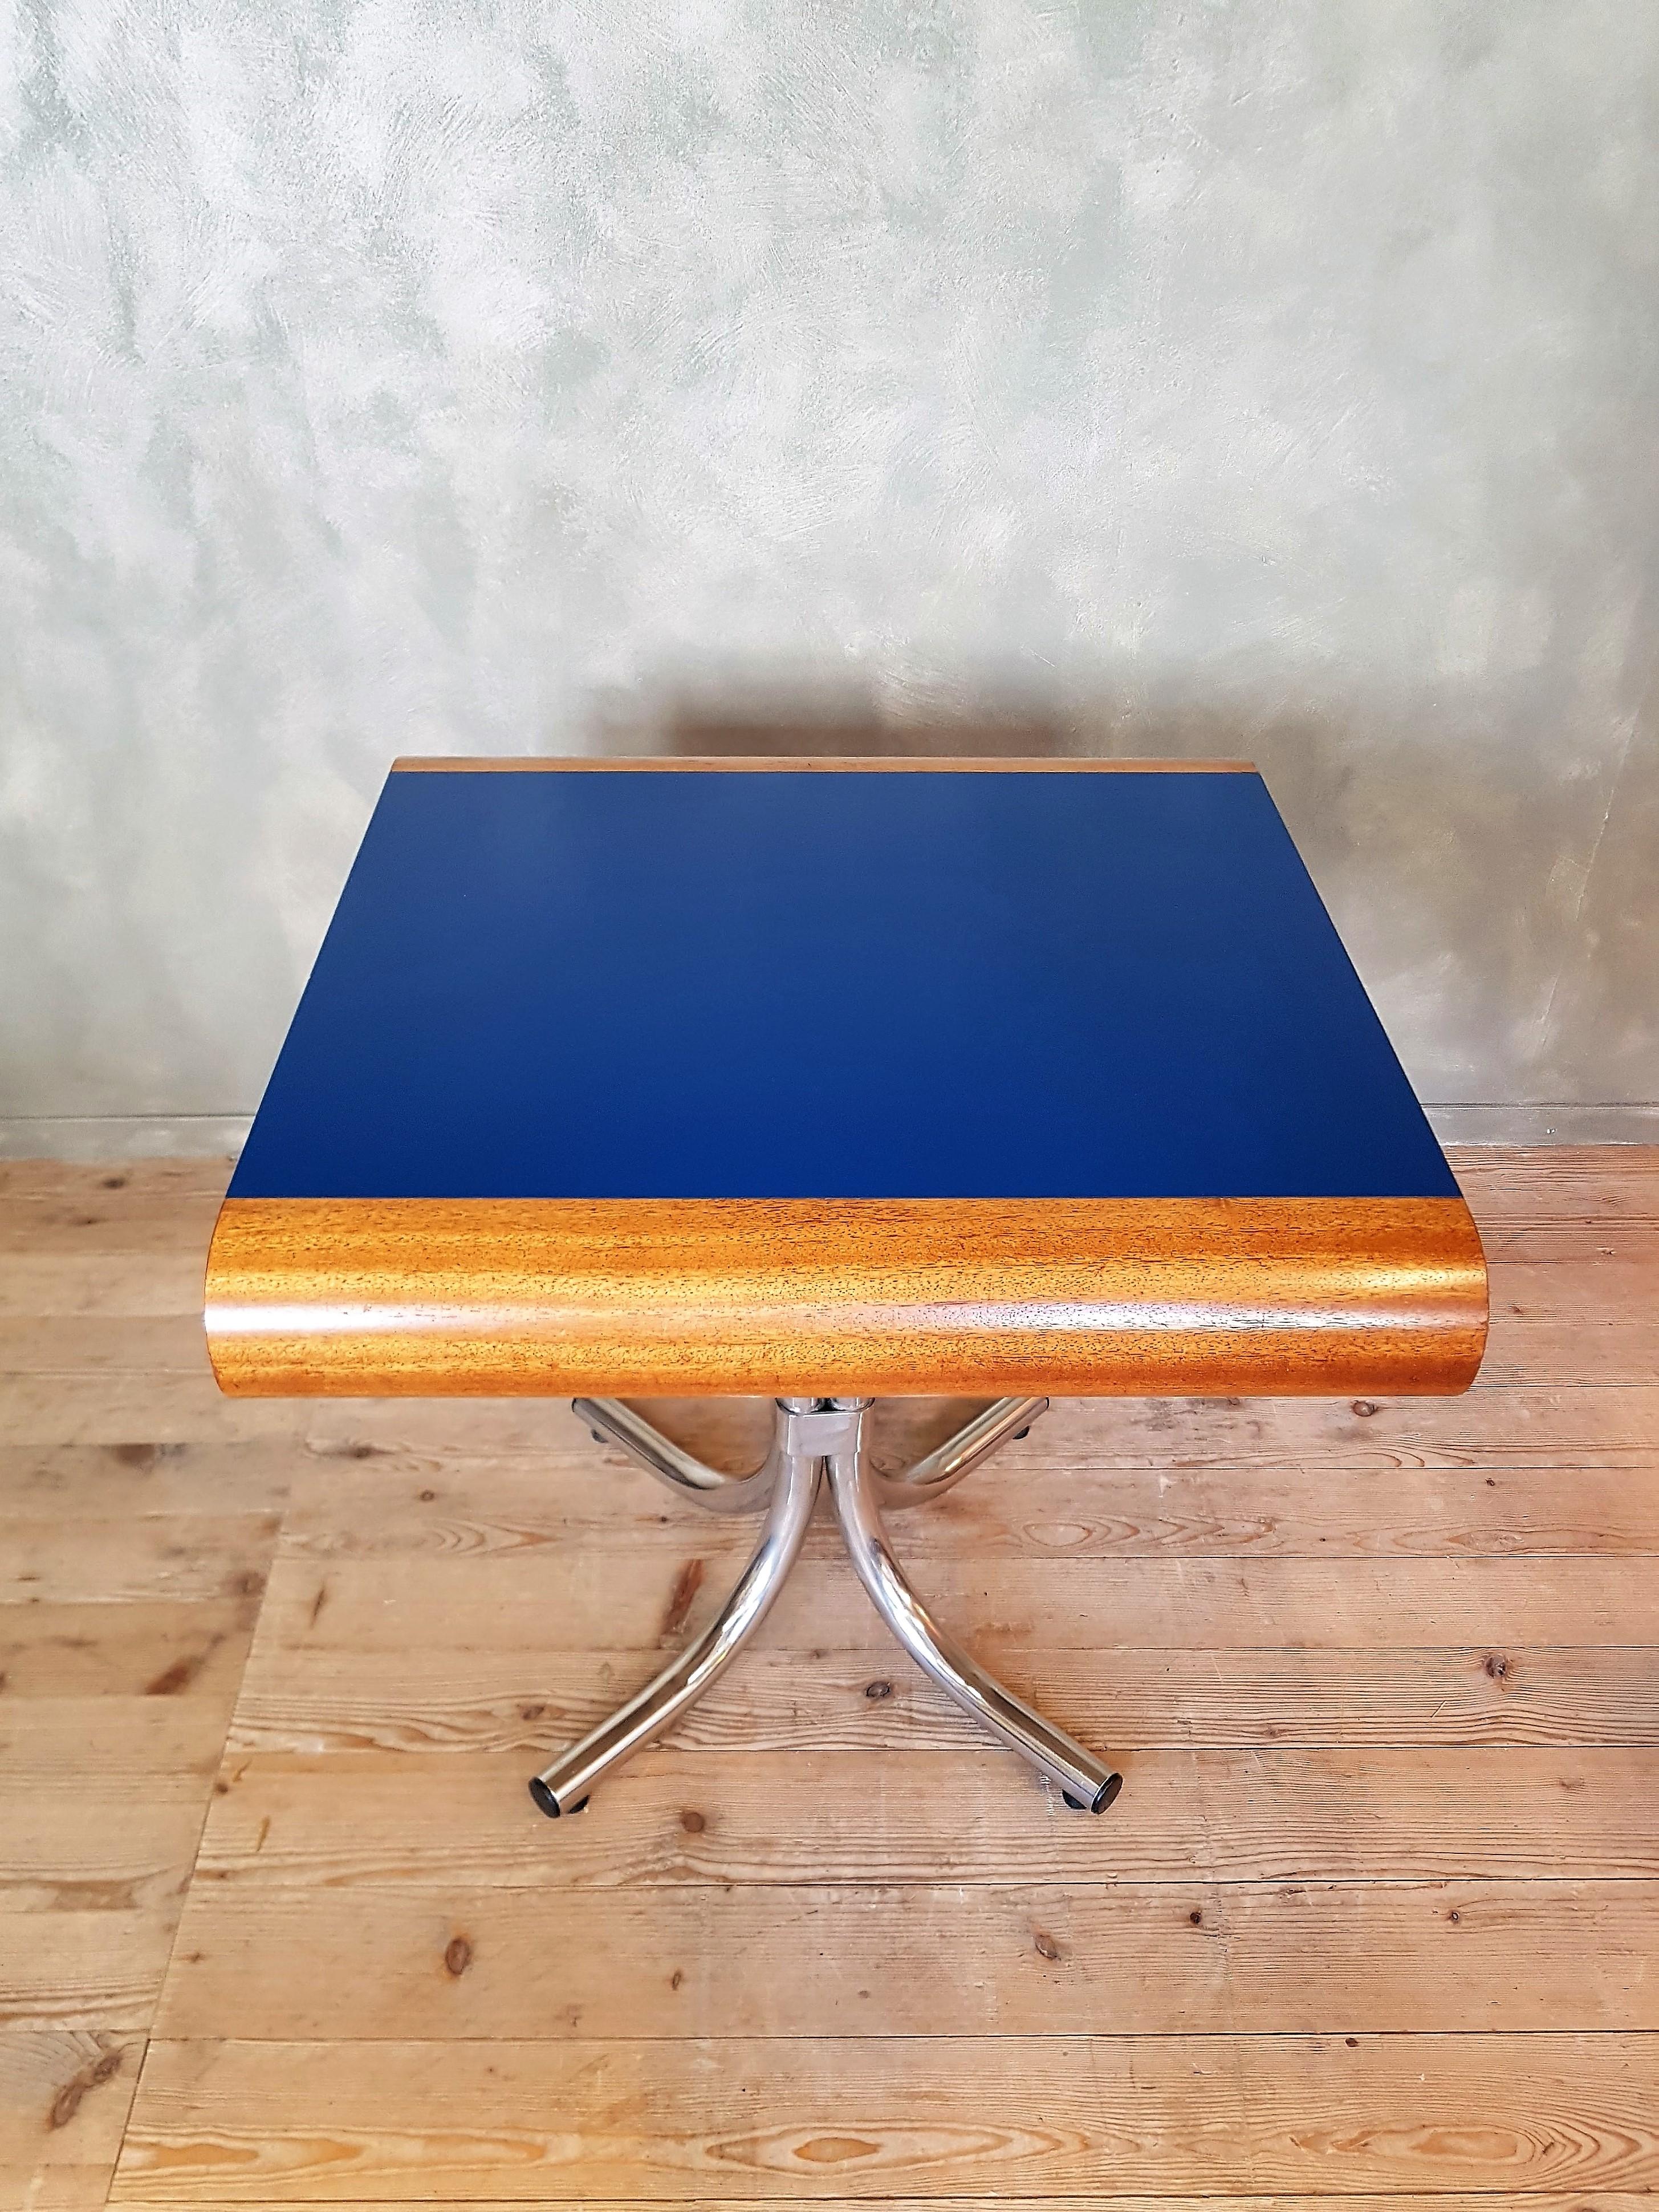 A table with curved sides and a royal blue middle section, what stands in contrast to the chrome base. Designed by architect Jürg C. Schindler from Zurich, produced in a limited edition of only very few tables.